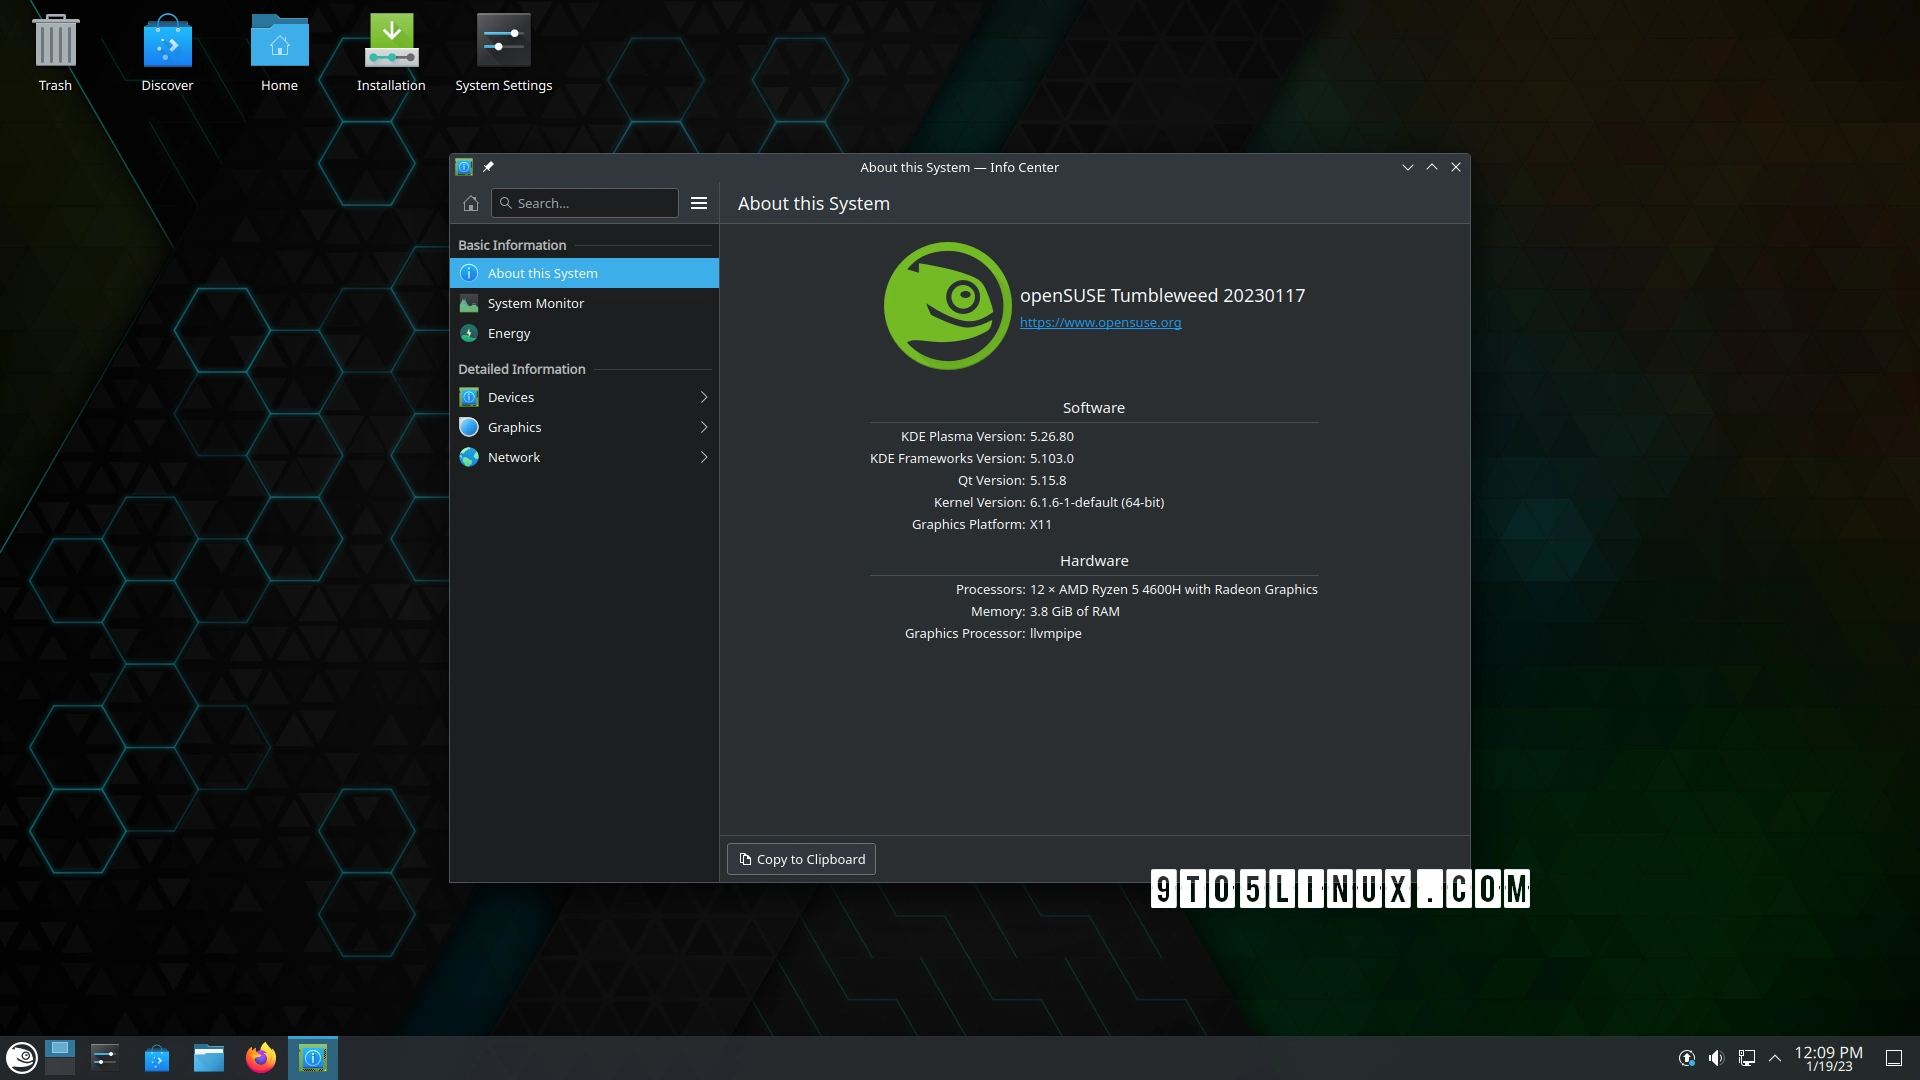 KDE Plasma 5.27 Beta Is Out with Plasma Welcome, Flatpak Permissions Settings, and Tiling Support